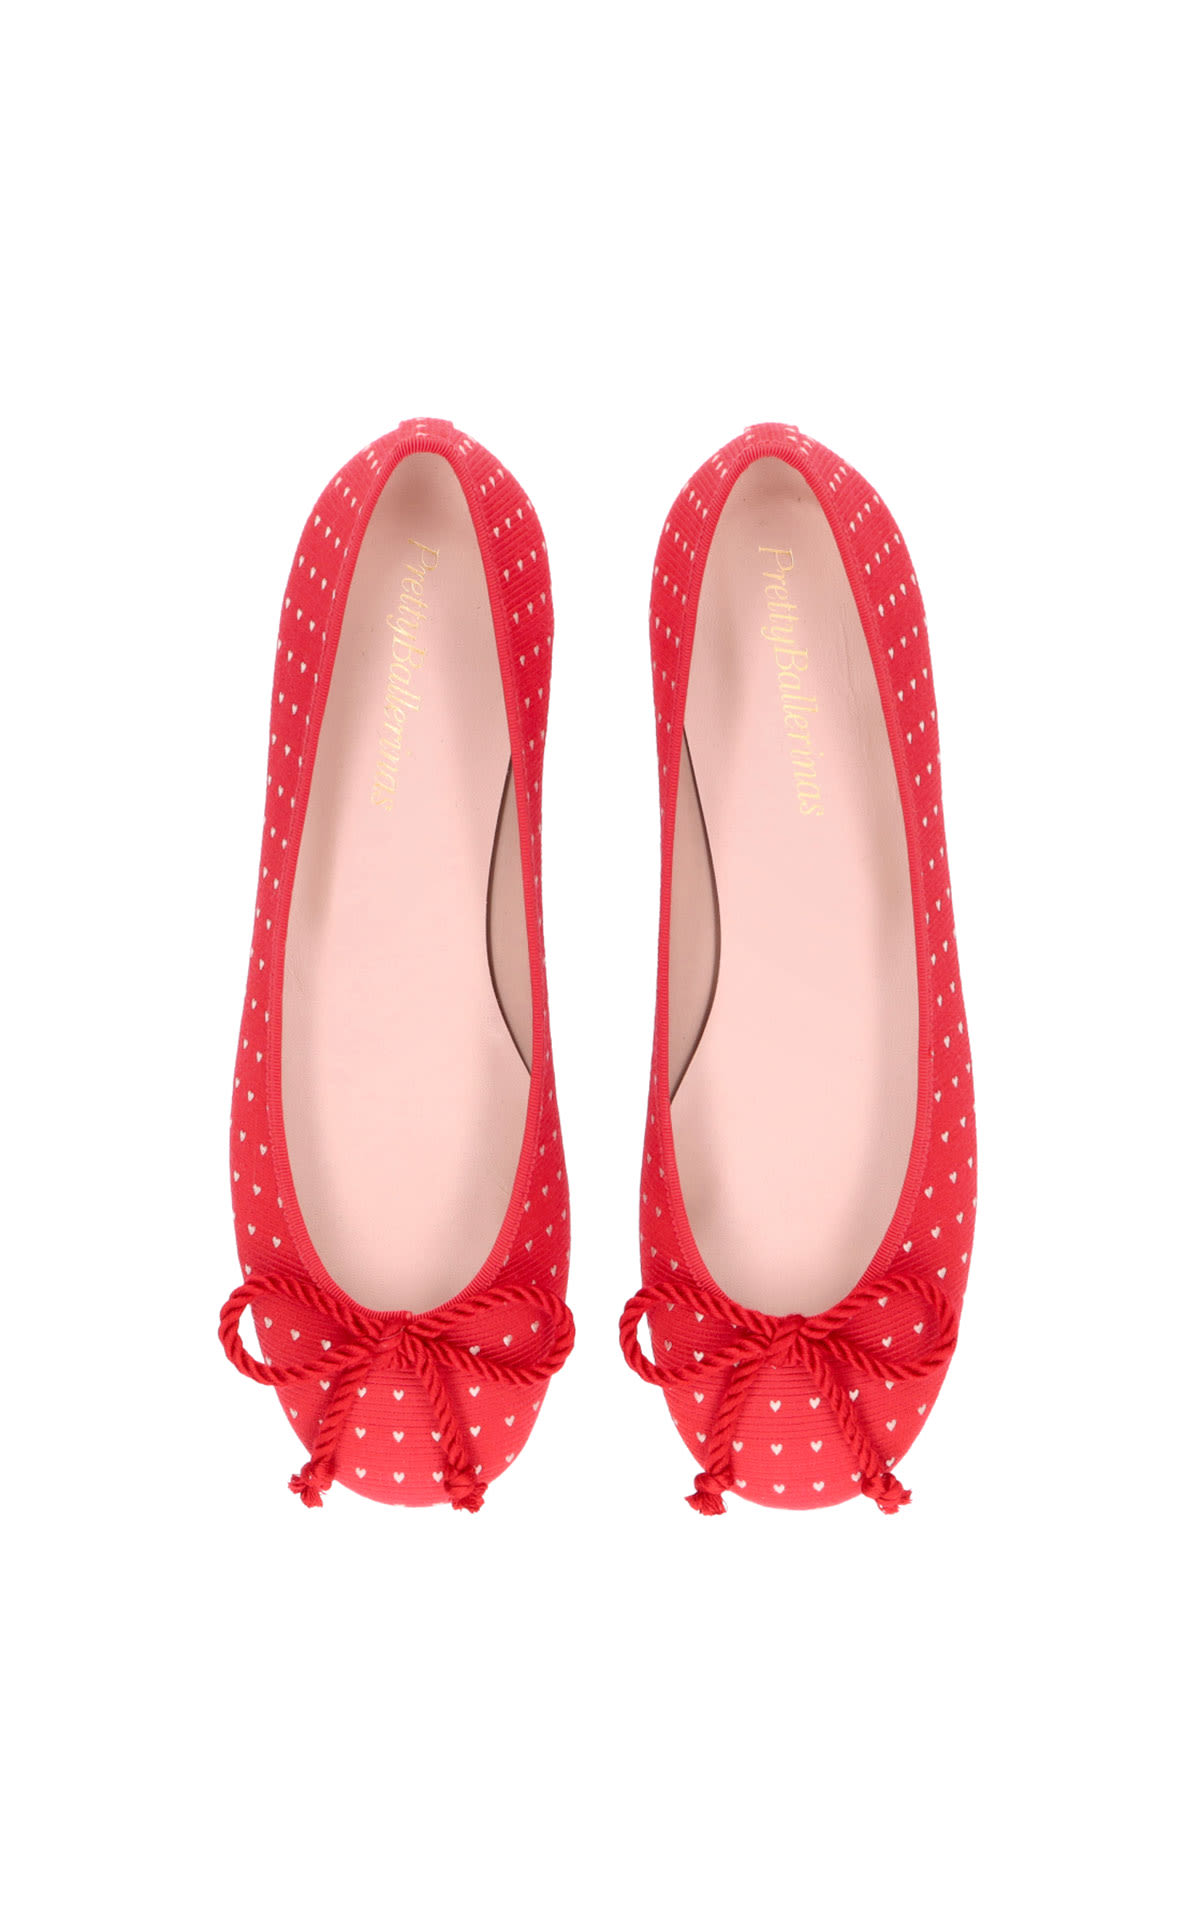 Red shoes with hearts Pretty Ballerinas